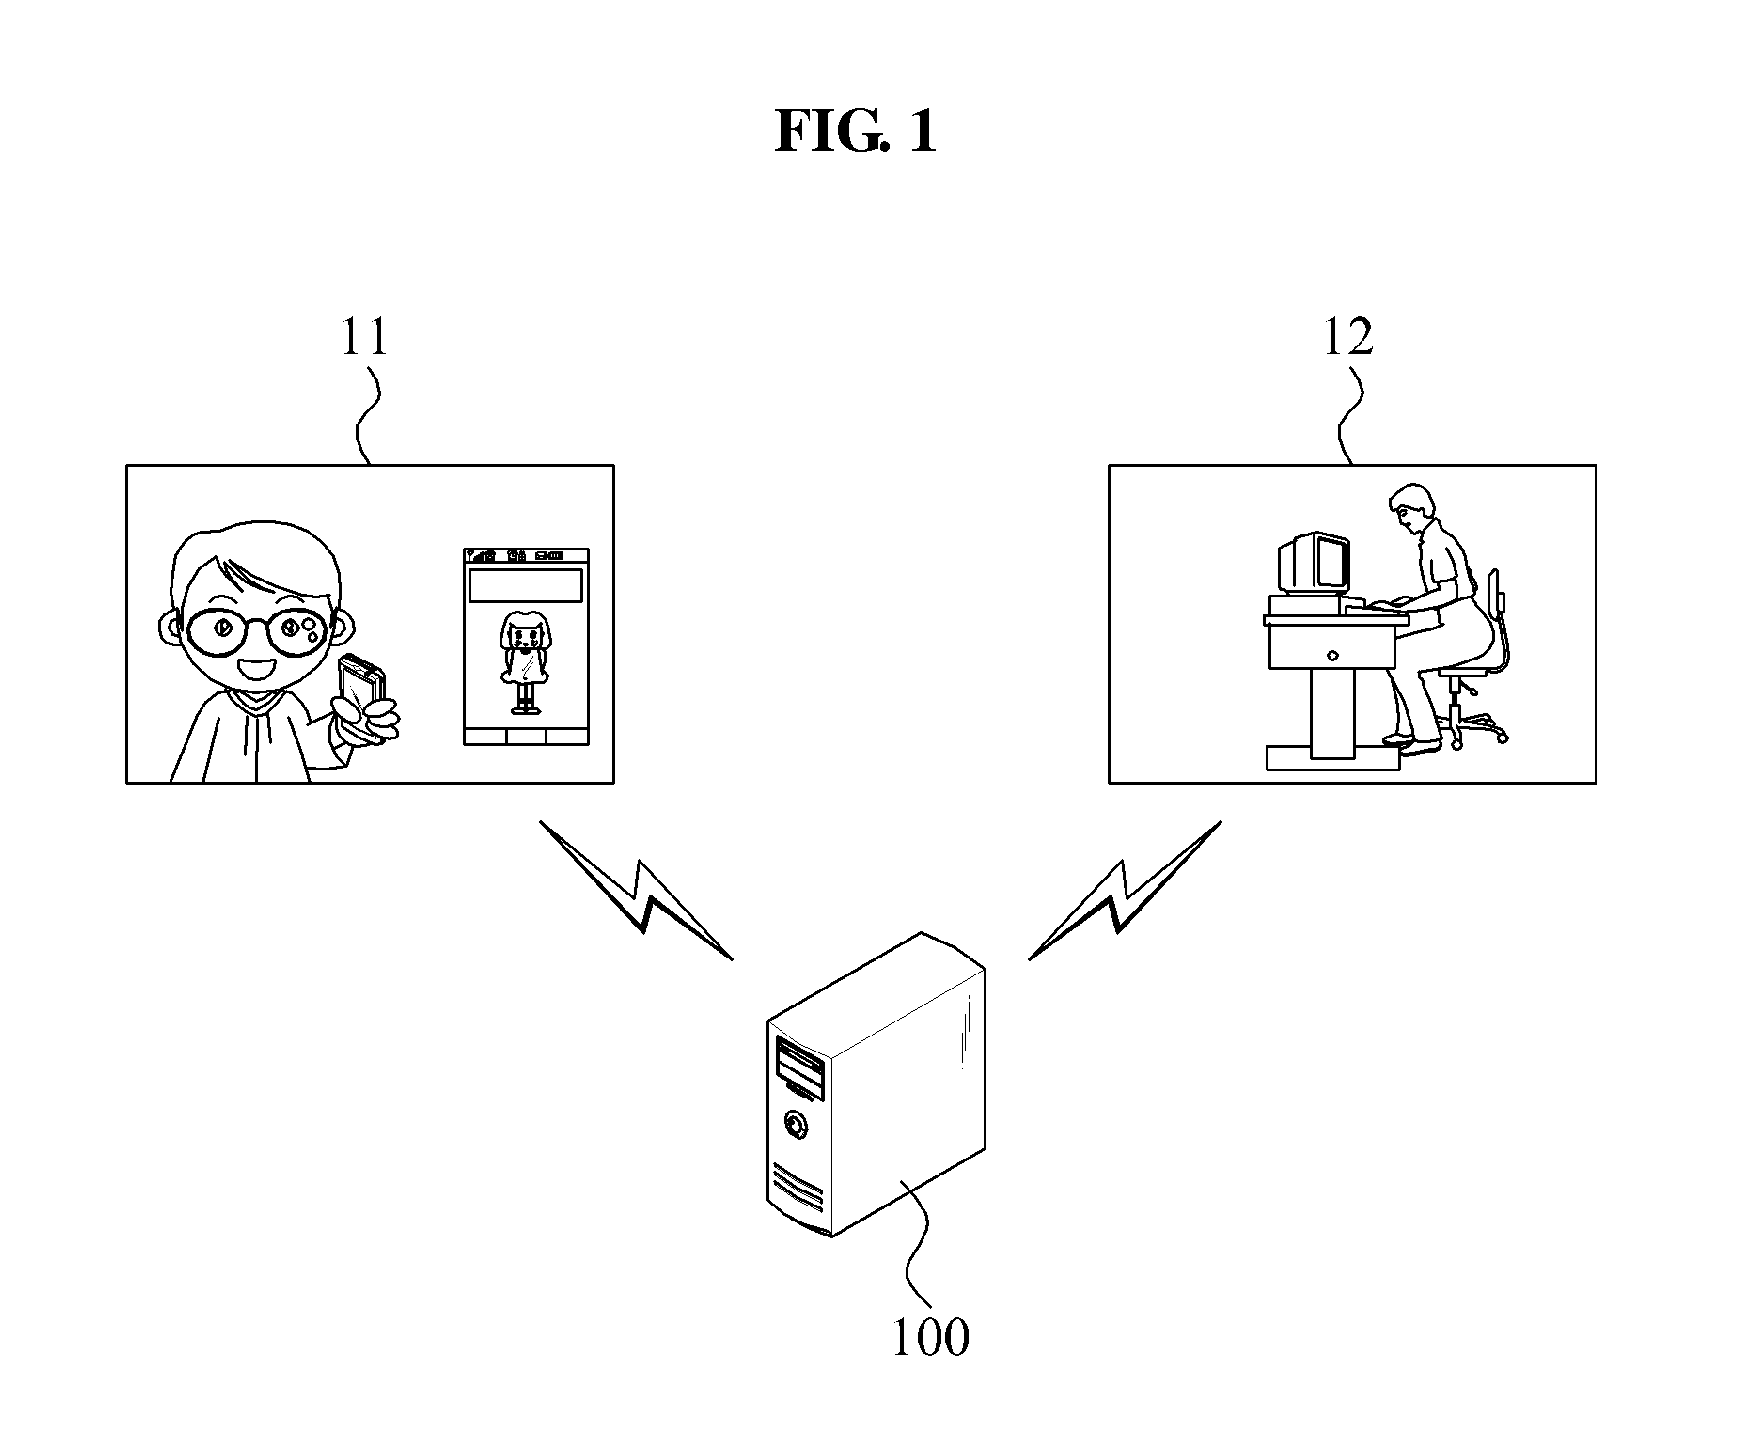 Content recommendation apparatus and method